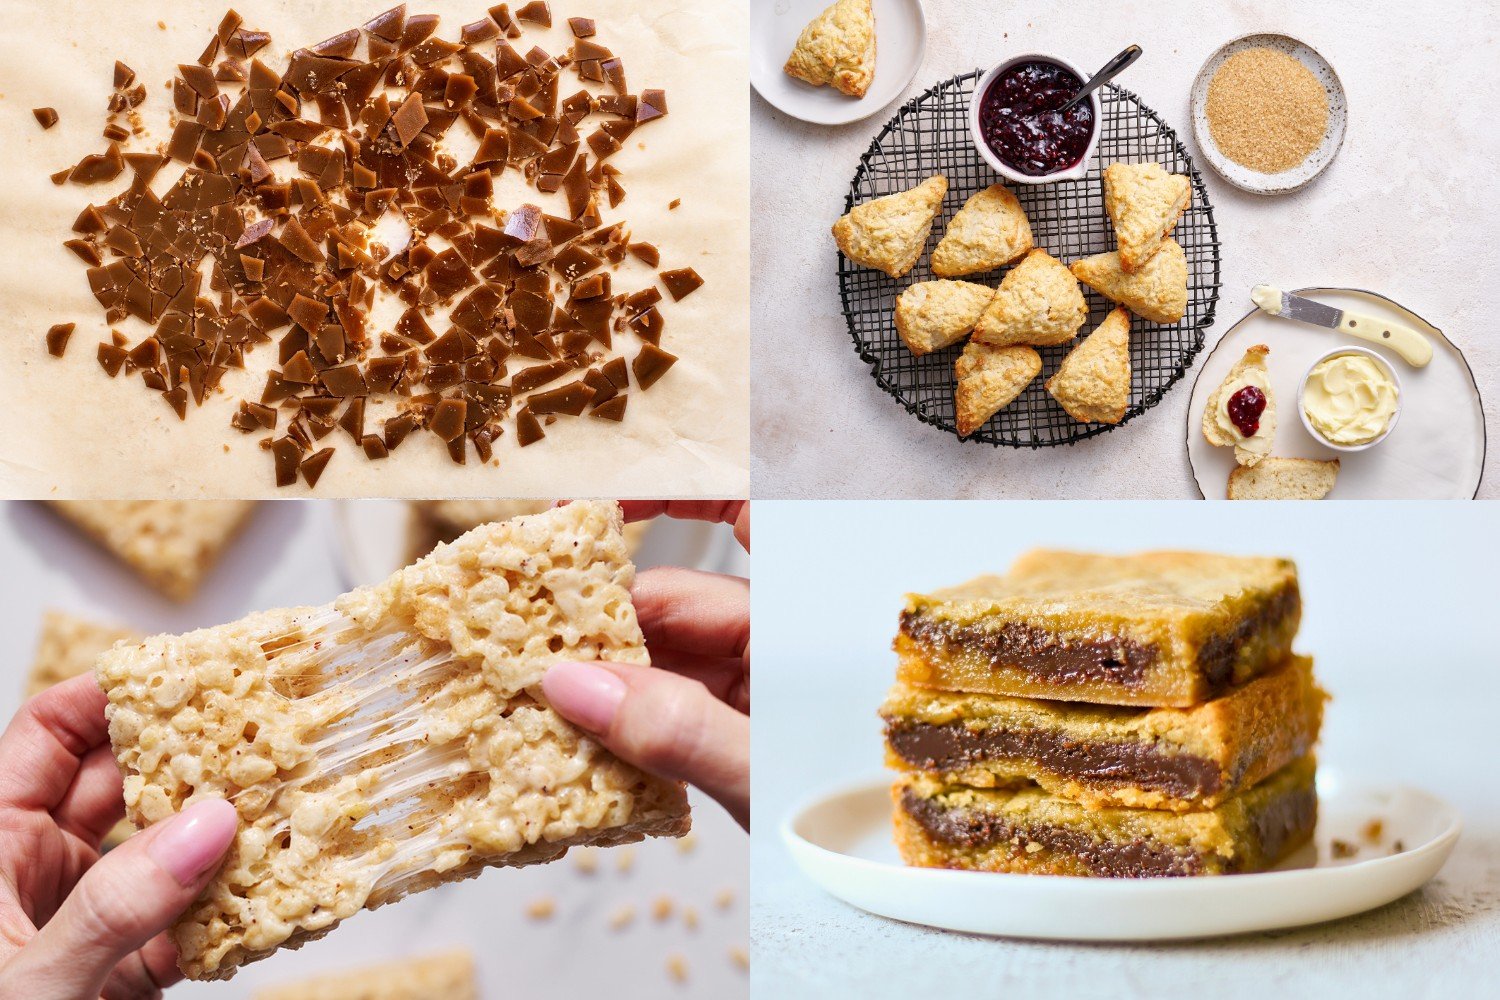 four easy dessert recipes, consisting of toffee bits, scones, rice crispy treats, and fudge-filled blondies.